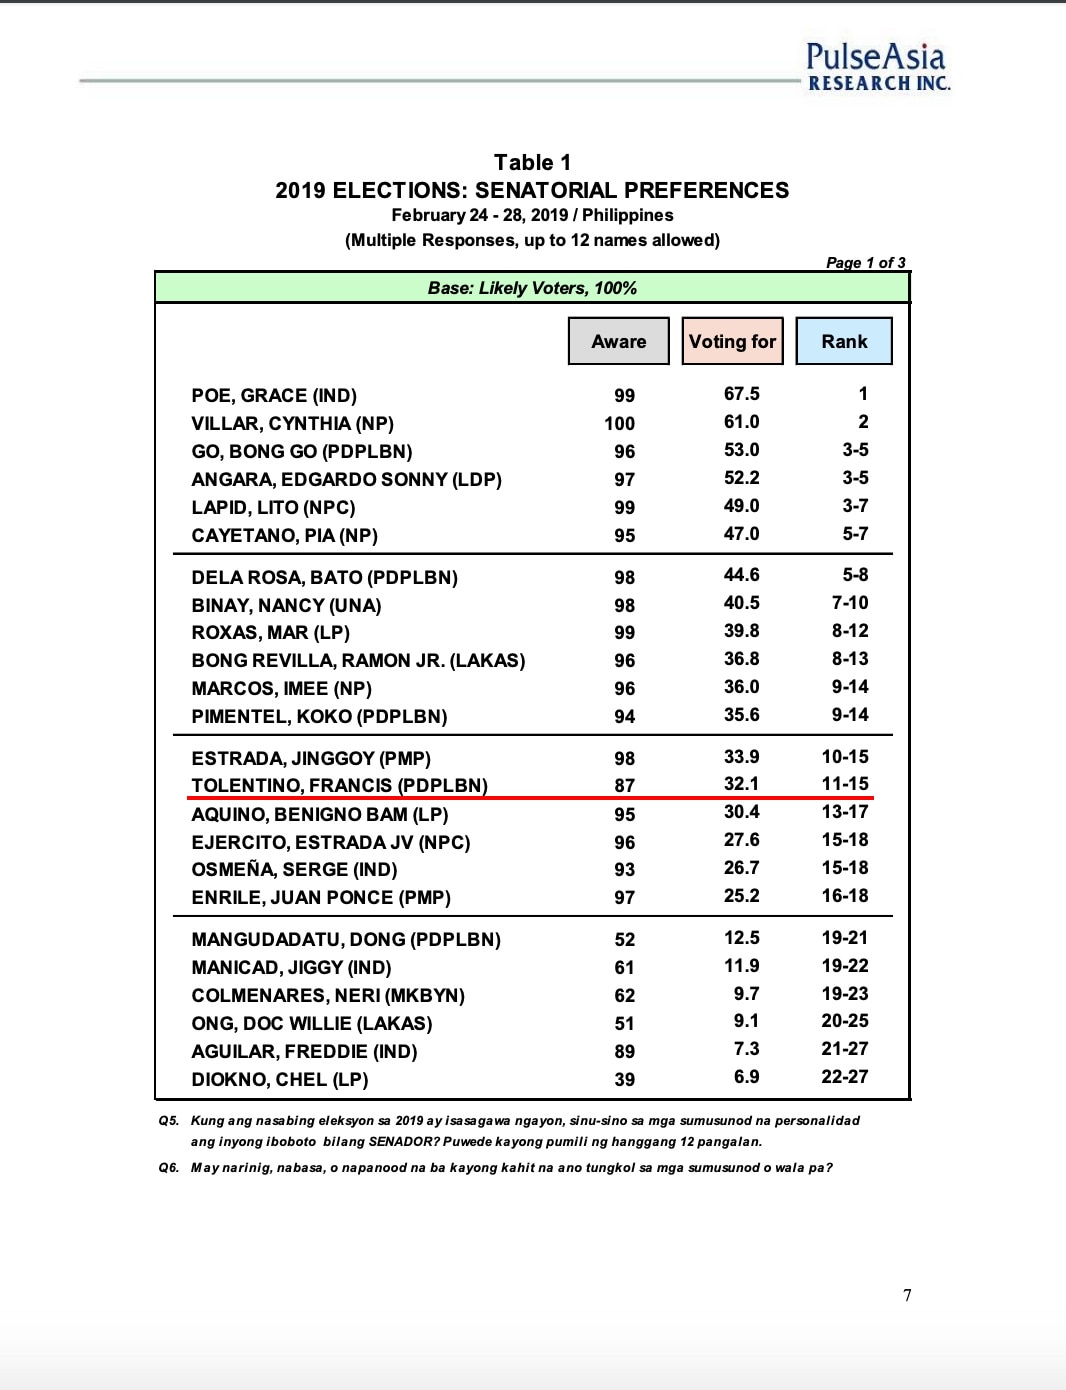 Bong Go surges to top 3 in Pulse Asia survey 2